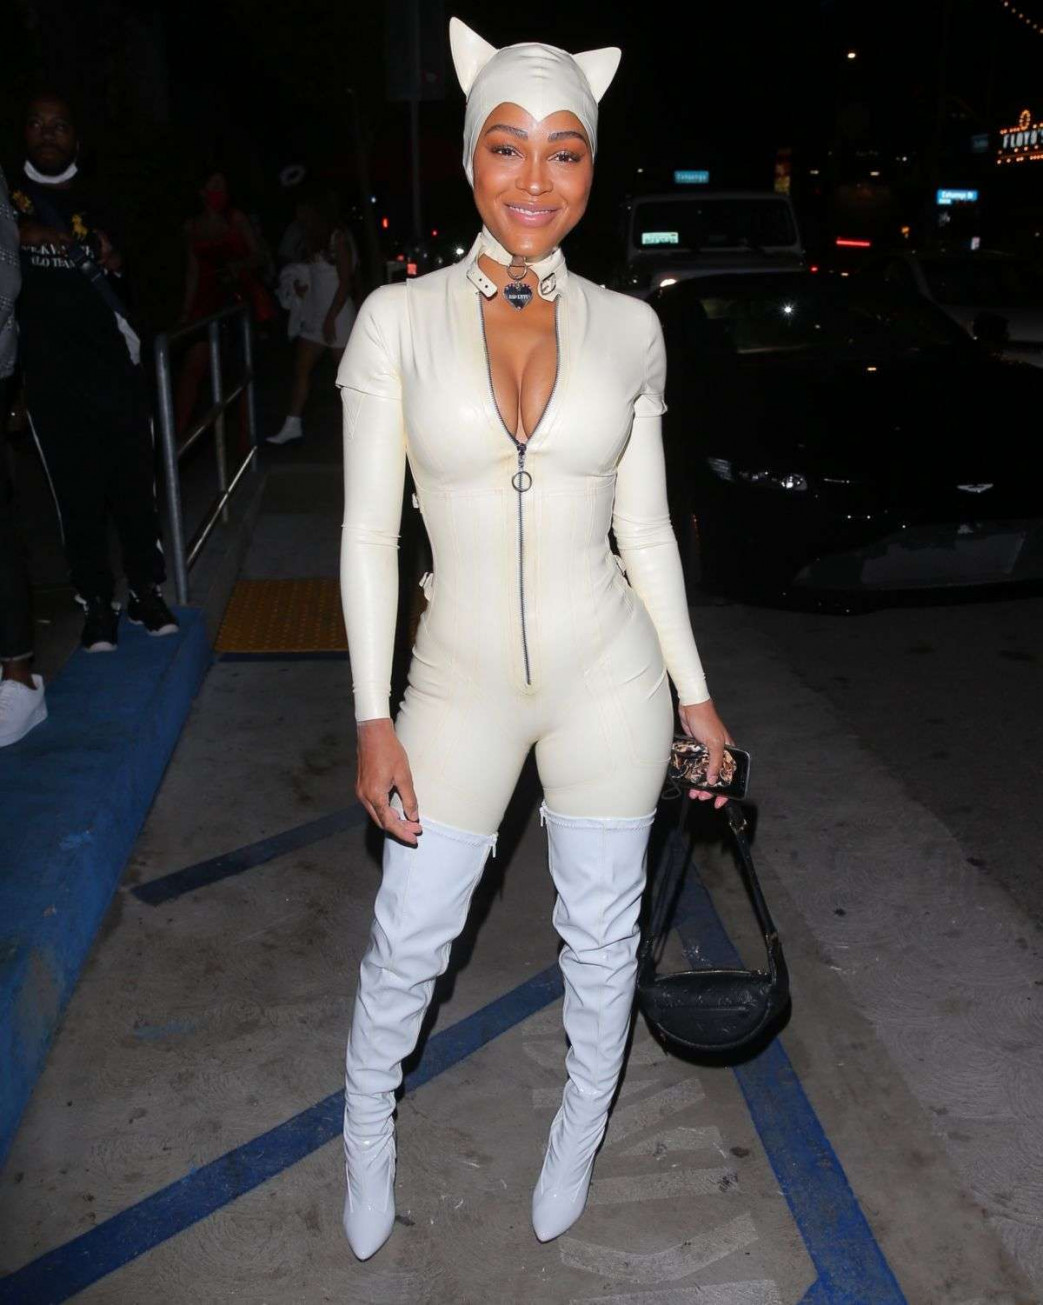 Meagan-Good-Busty-In-White-Catsuit-For-Halloween-2020-6.jpg